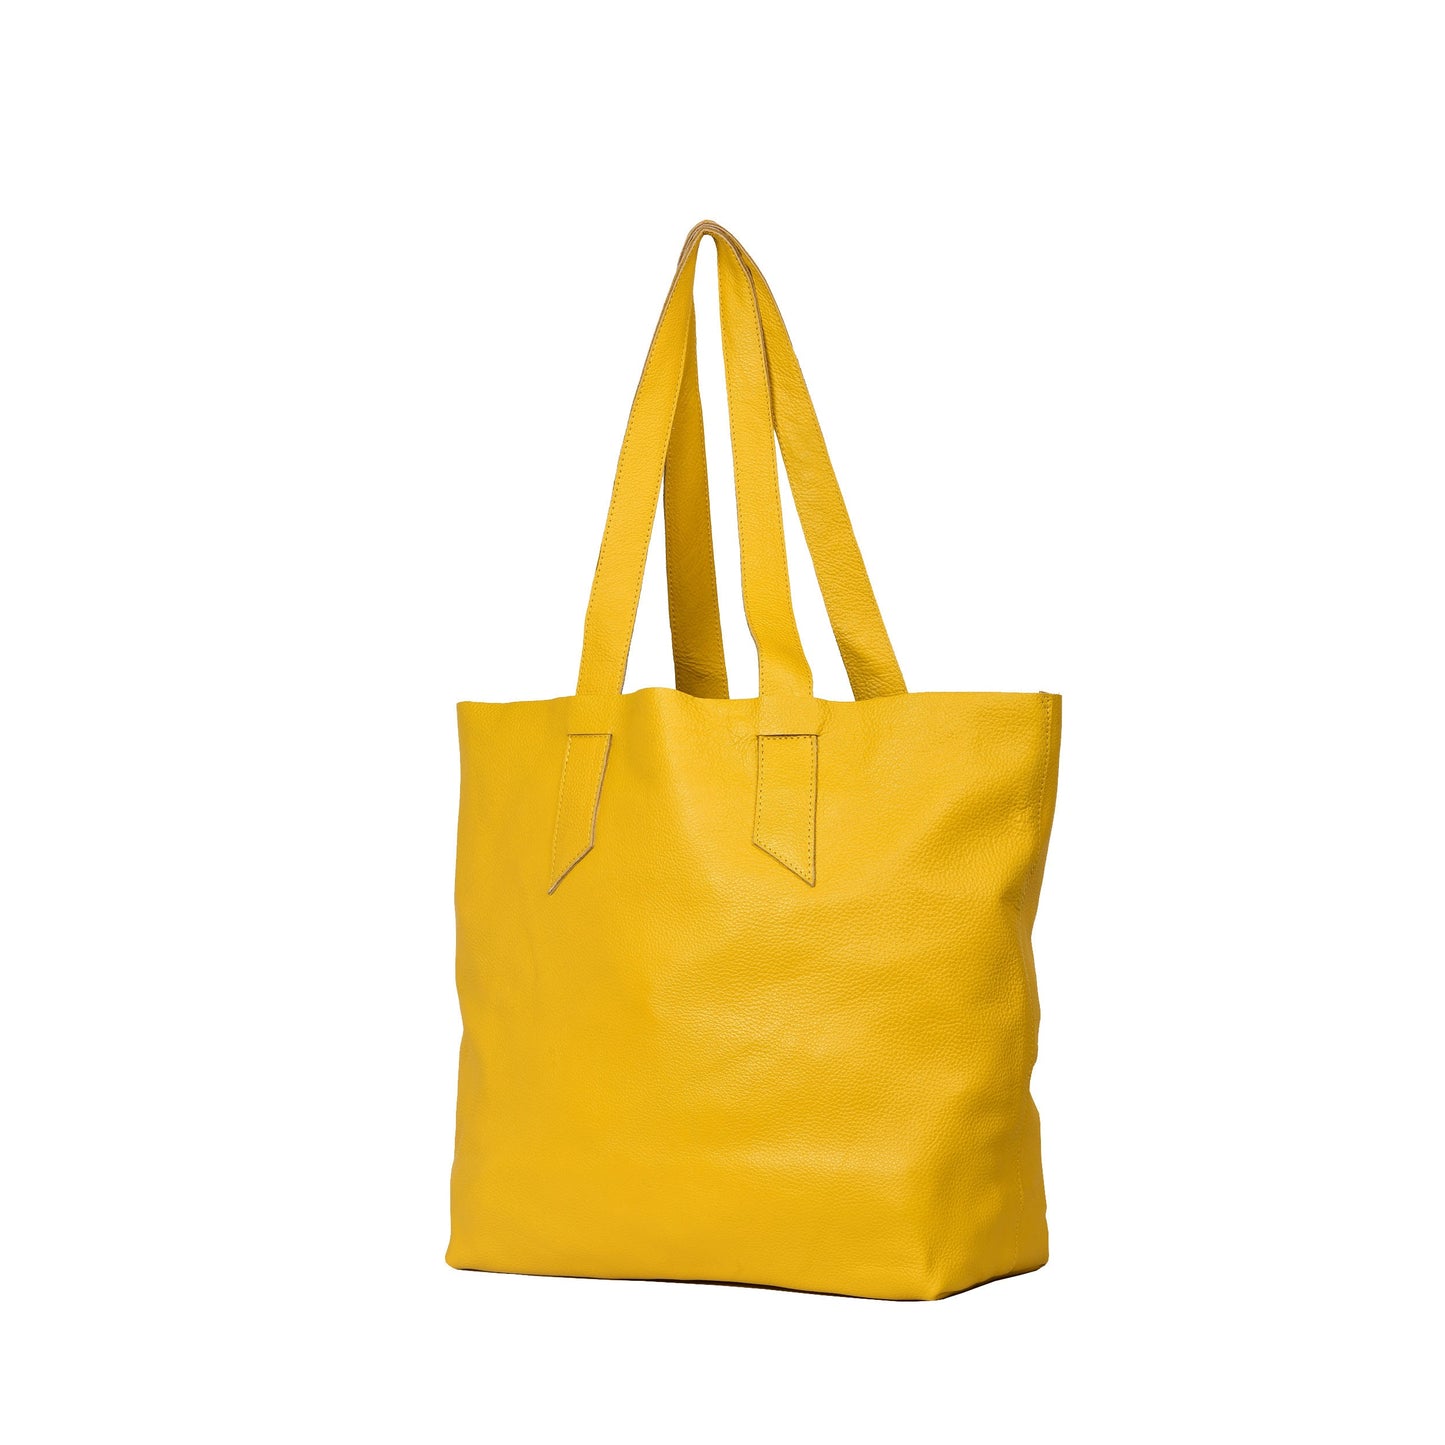 Yellow Leather Tote Bag for Women Raw Edge Shopper Purse Unlined Bag Leather Shoulder Bag Large Marketing Bag Everyday Tote Bag Large